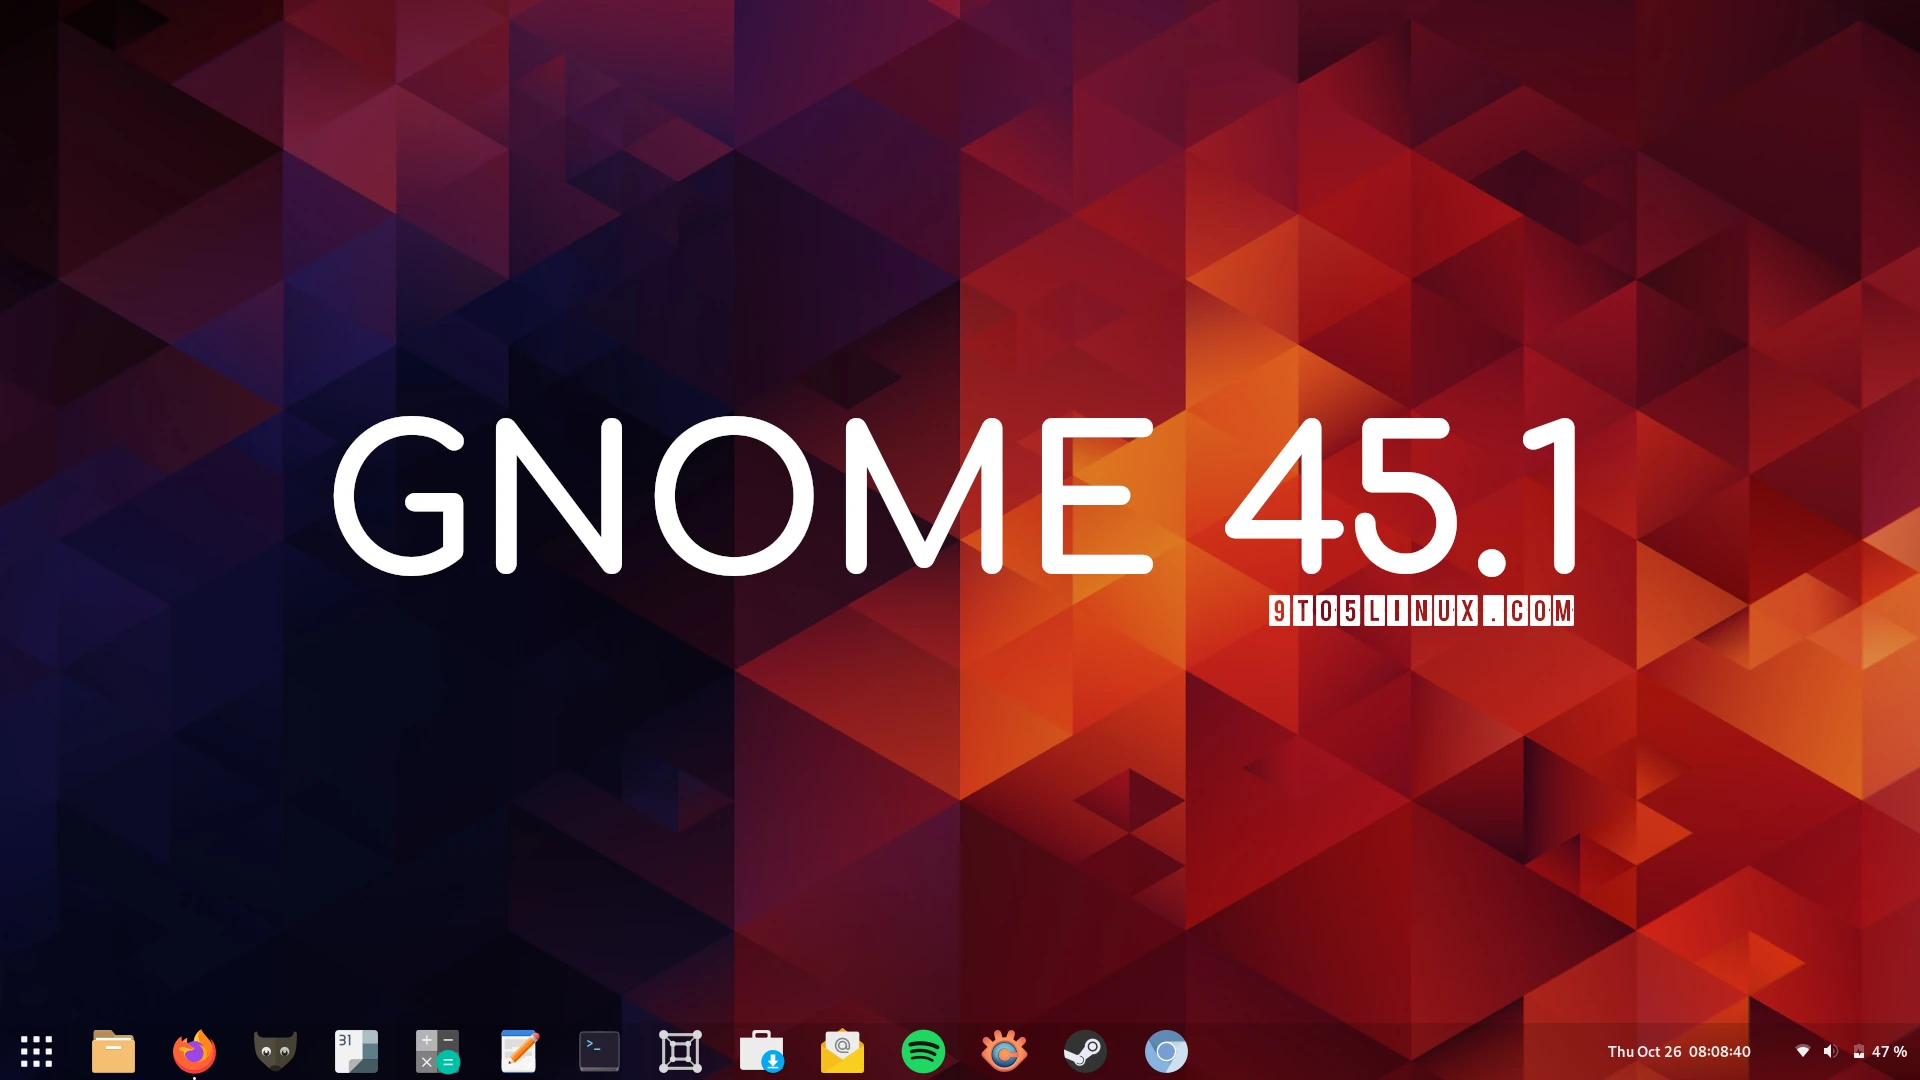 GNOME 45.1 Improves Flatpak Permission Checks, Adds Support for More CPUs